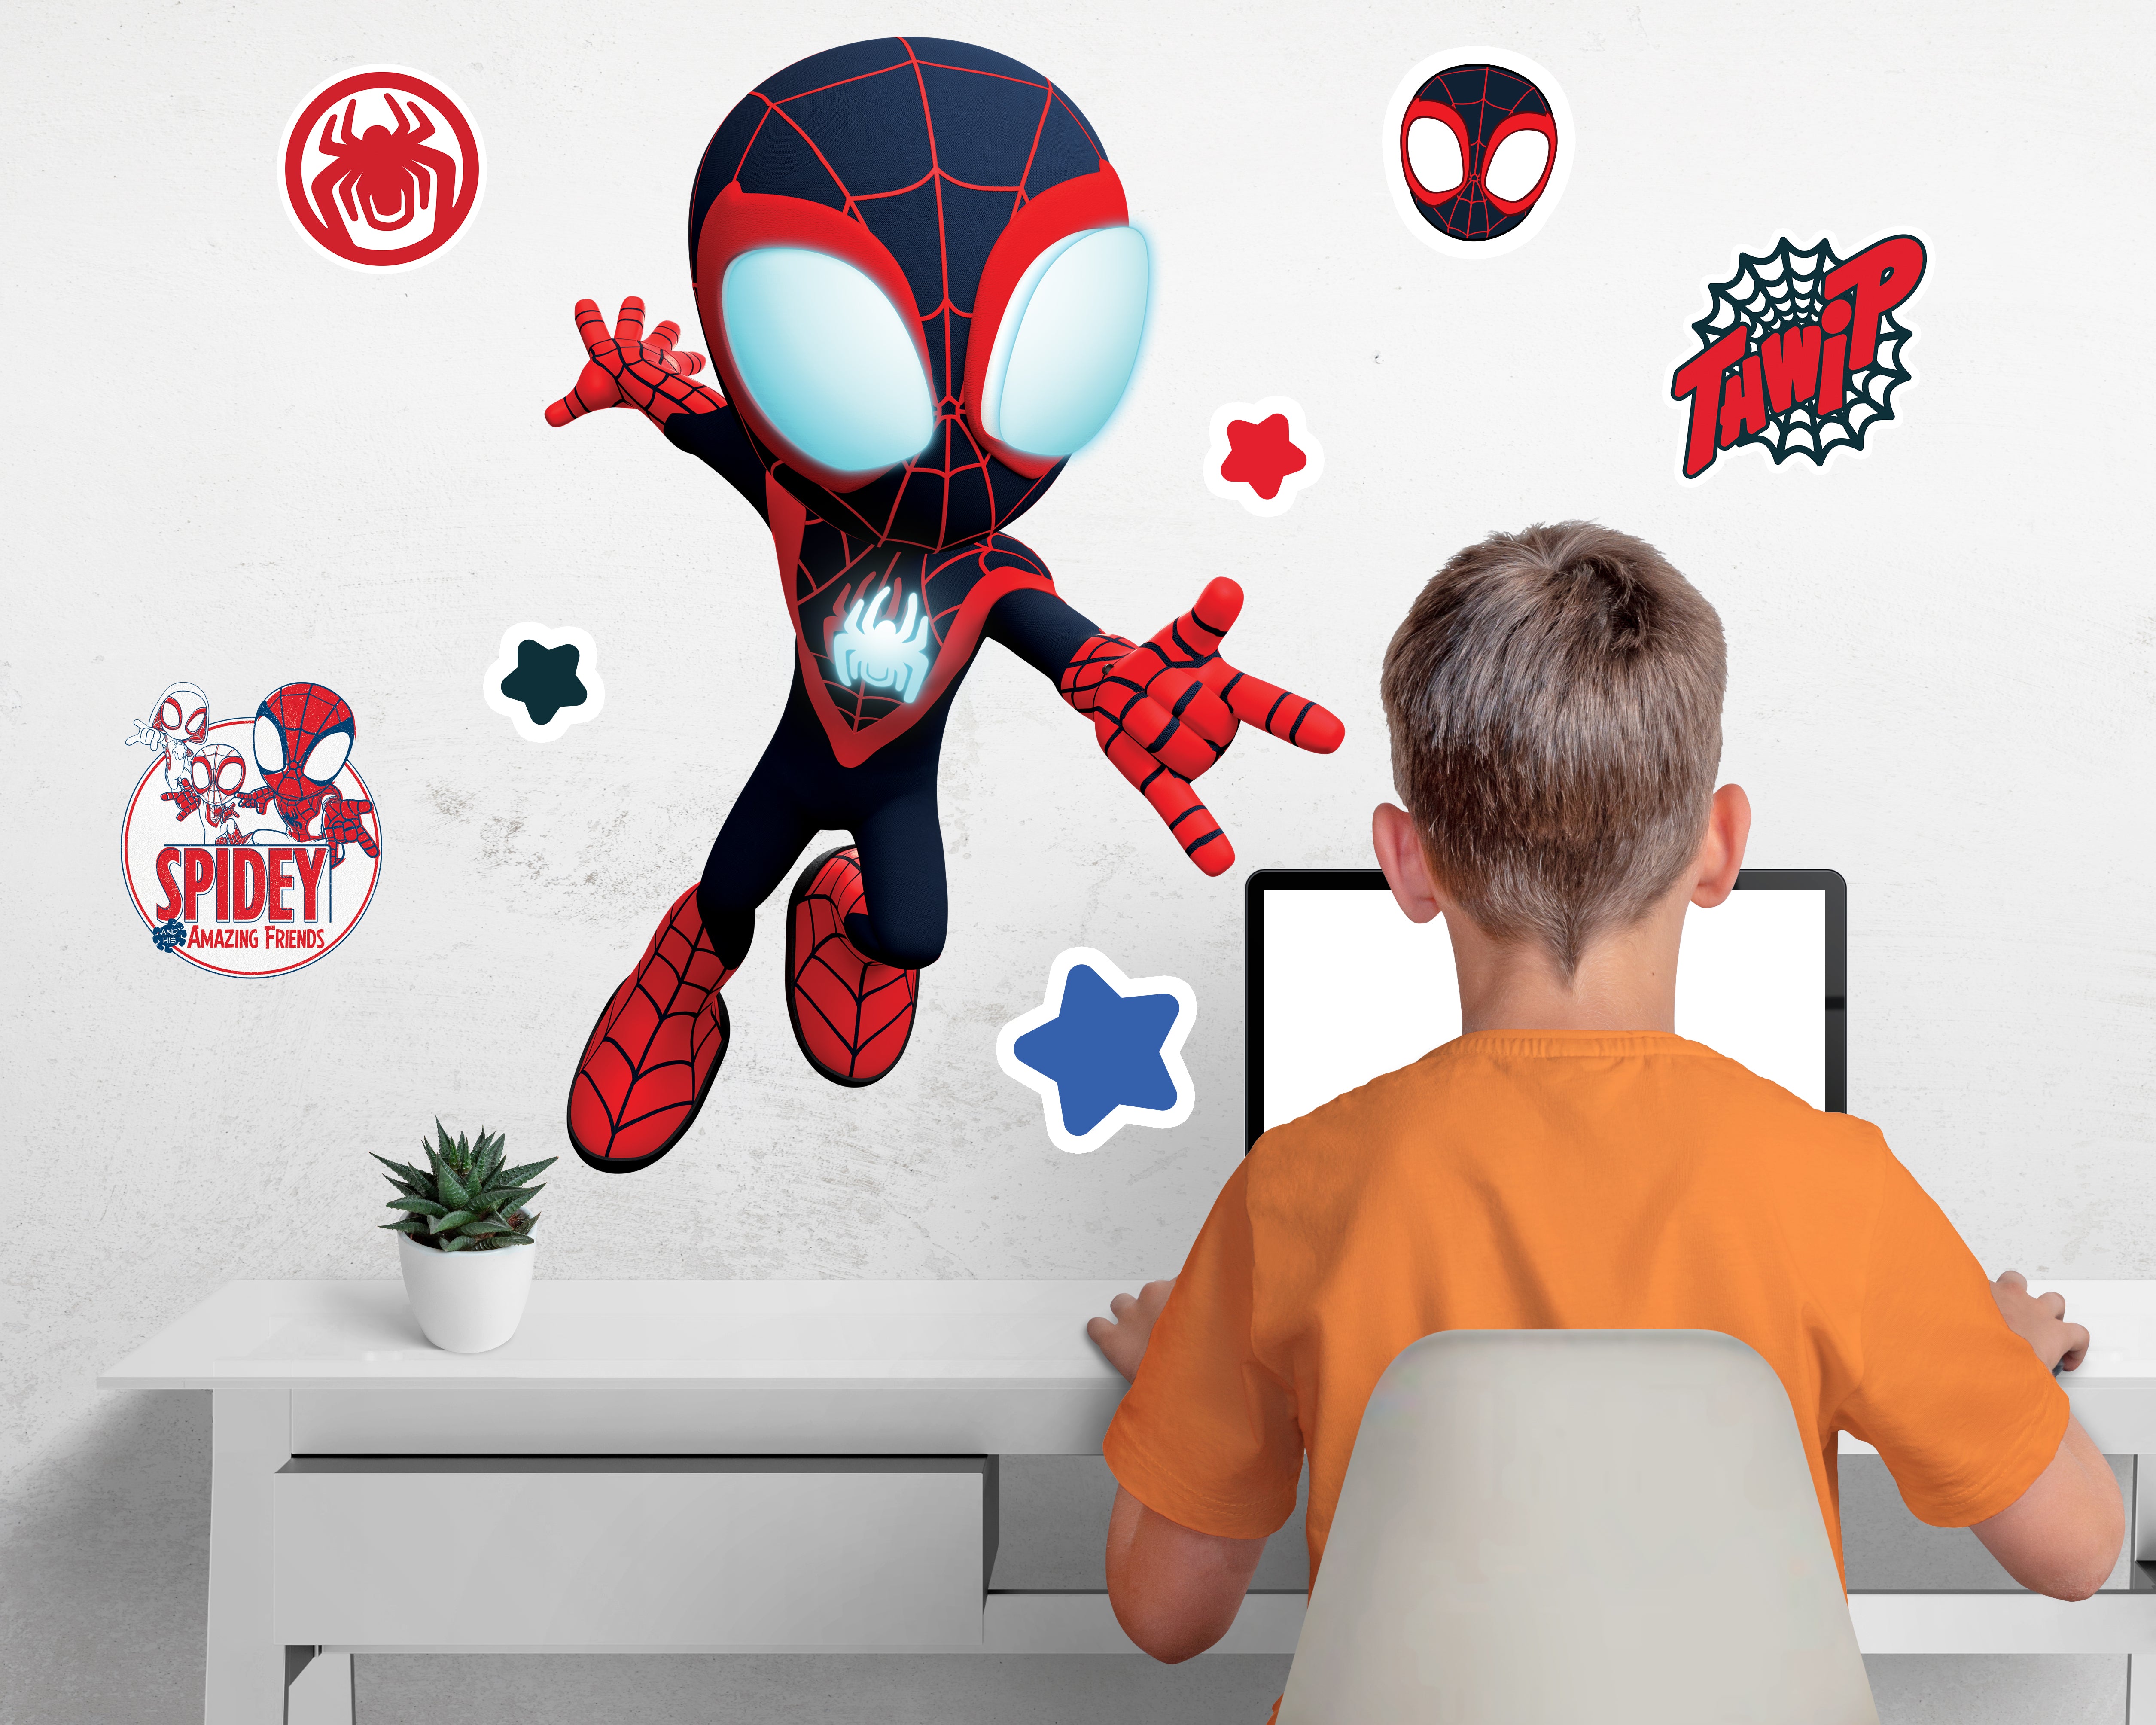 MILES MORALES Spidey And His Amazing Friends 3D Wall Sticker Decal